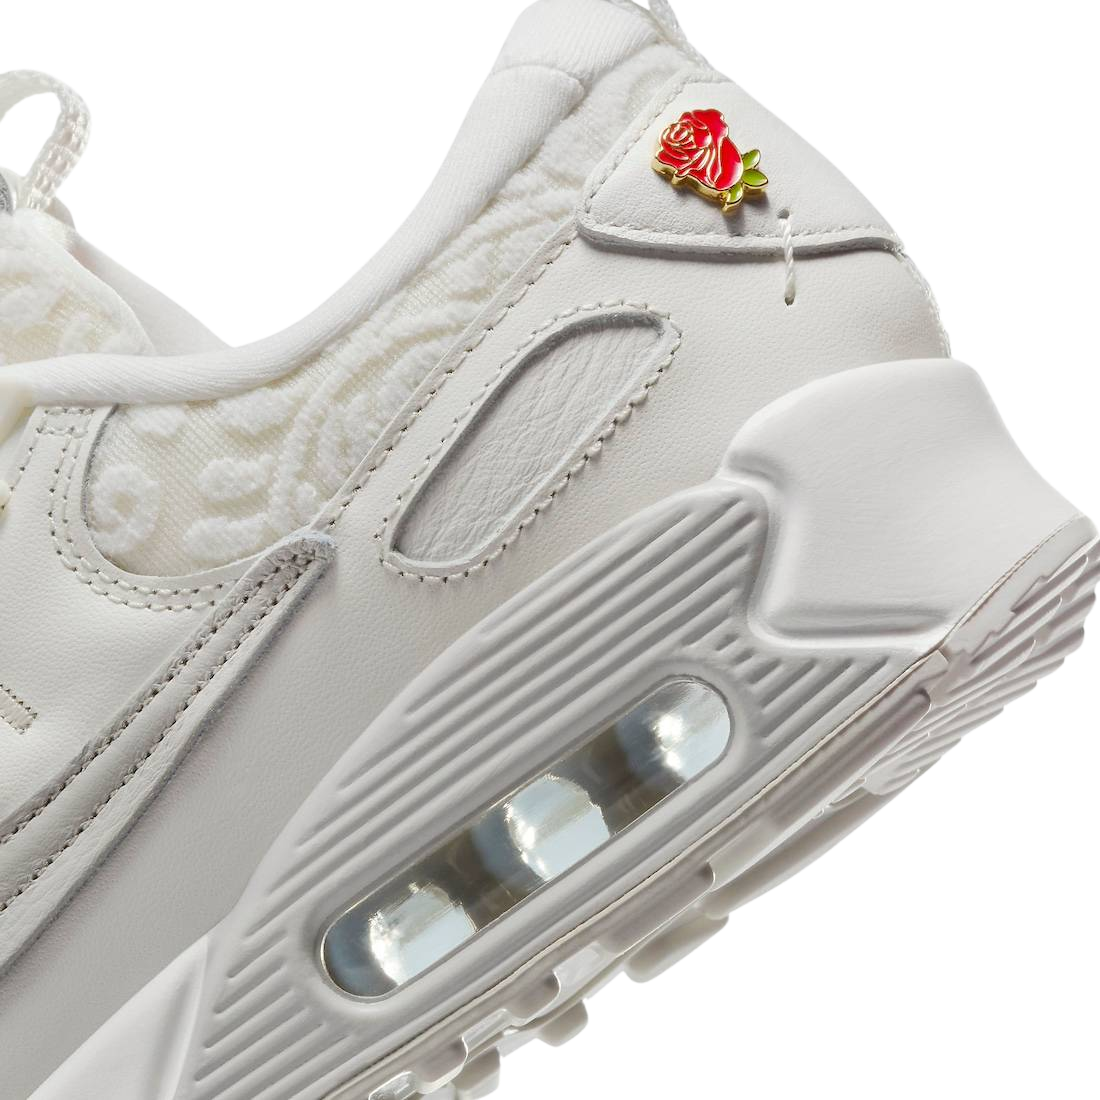 Nike Air Max 90 Futura Give Her Flowers (W)